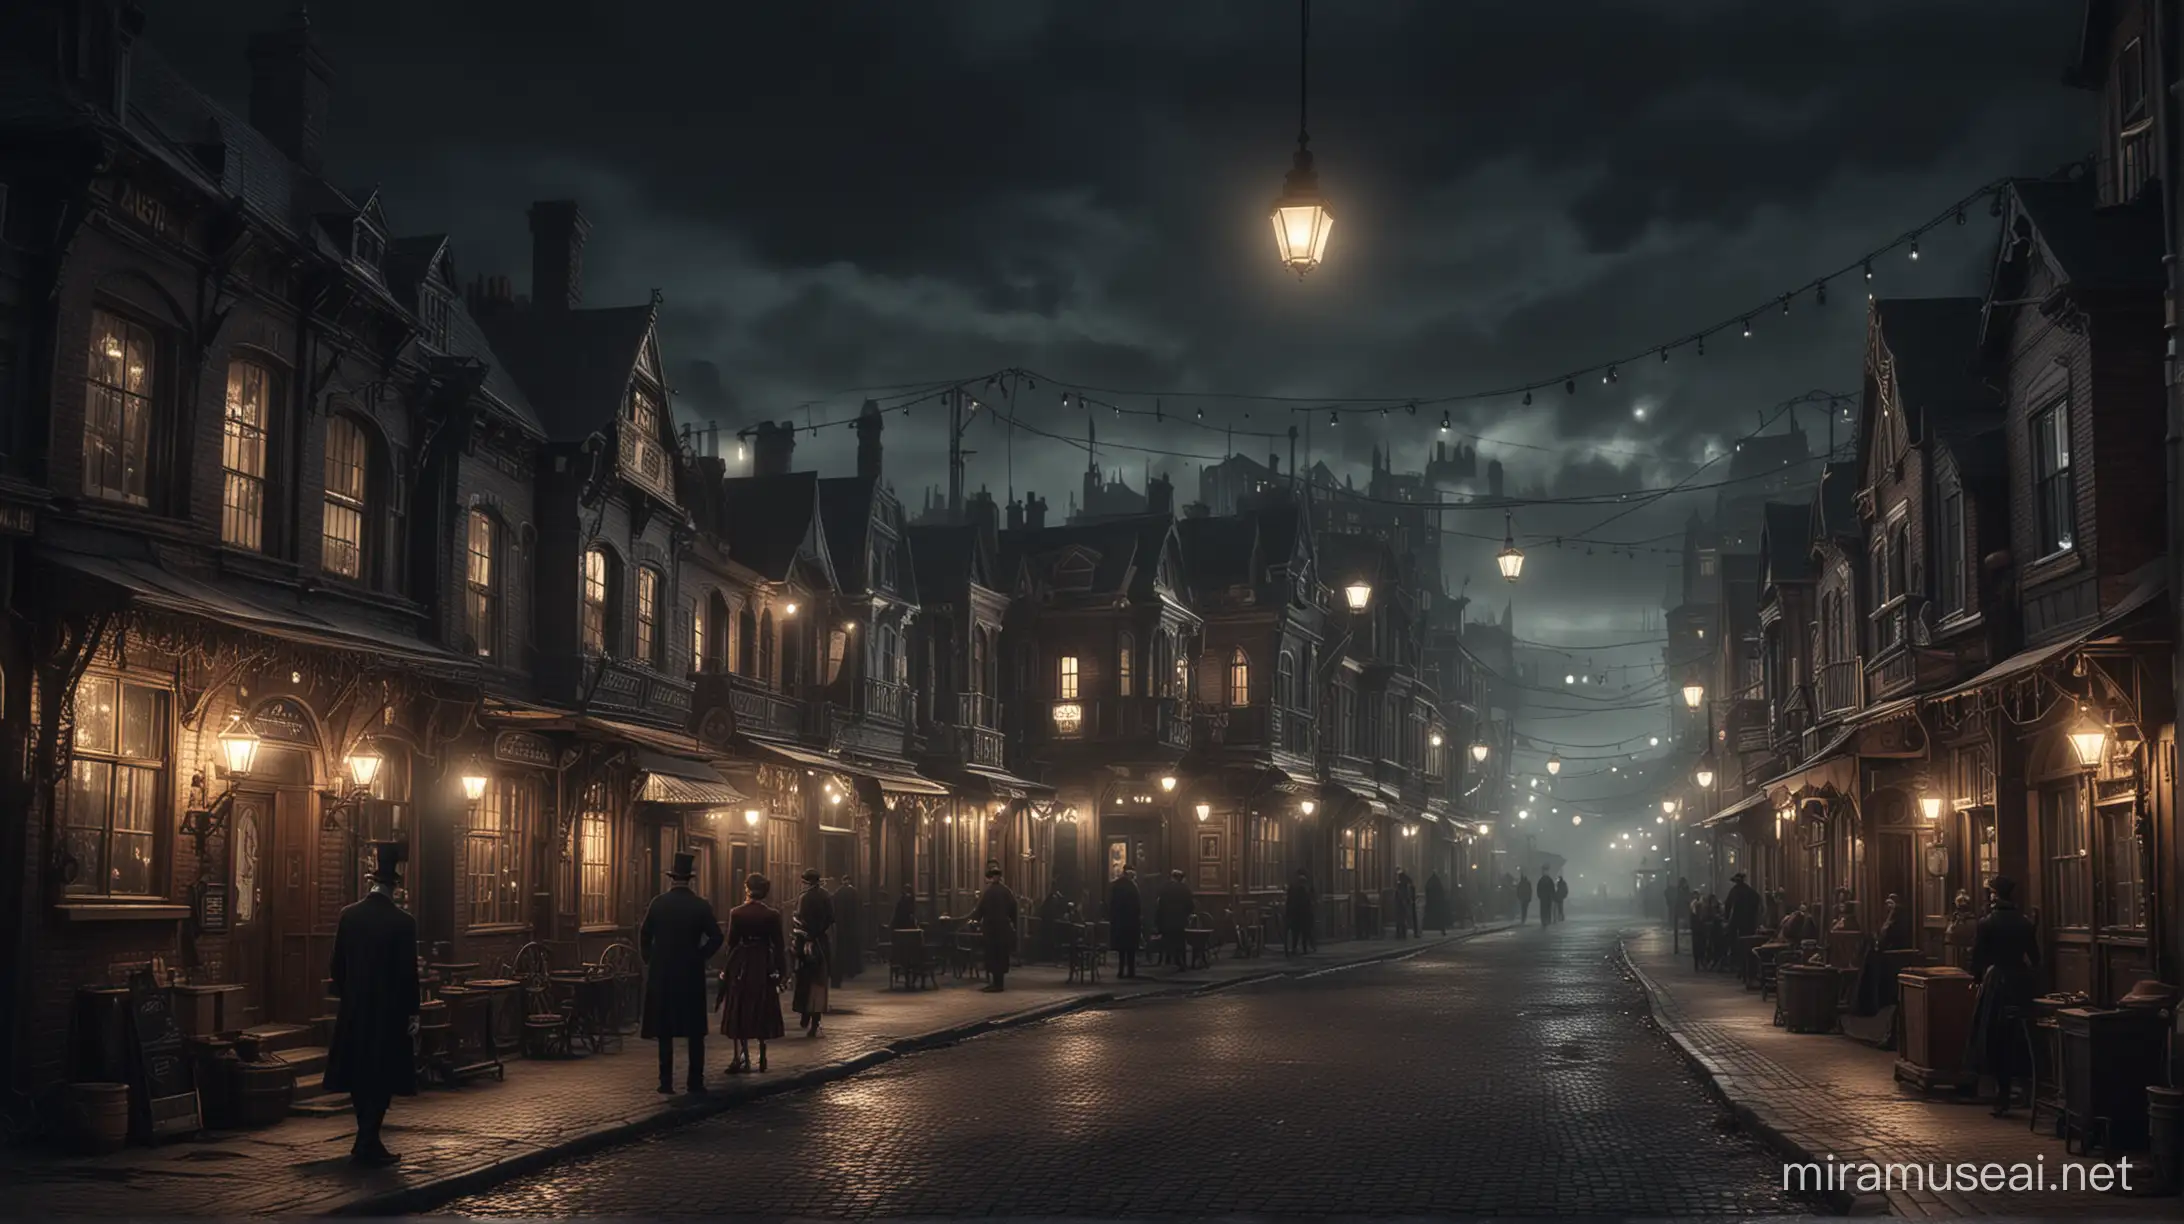 small steampunk suburb at night, very dark, many lights, people in victorian suits and steampunk dresses